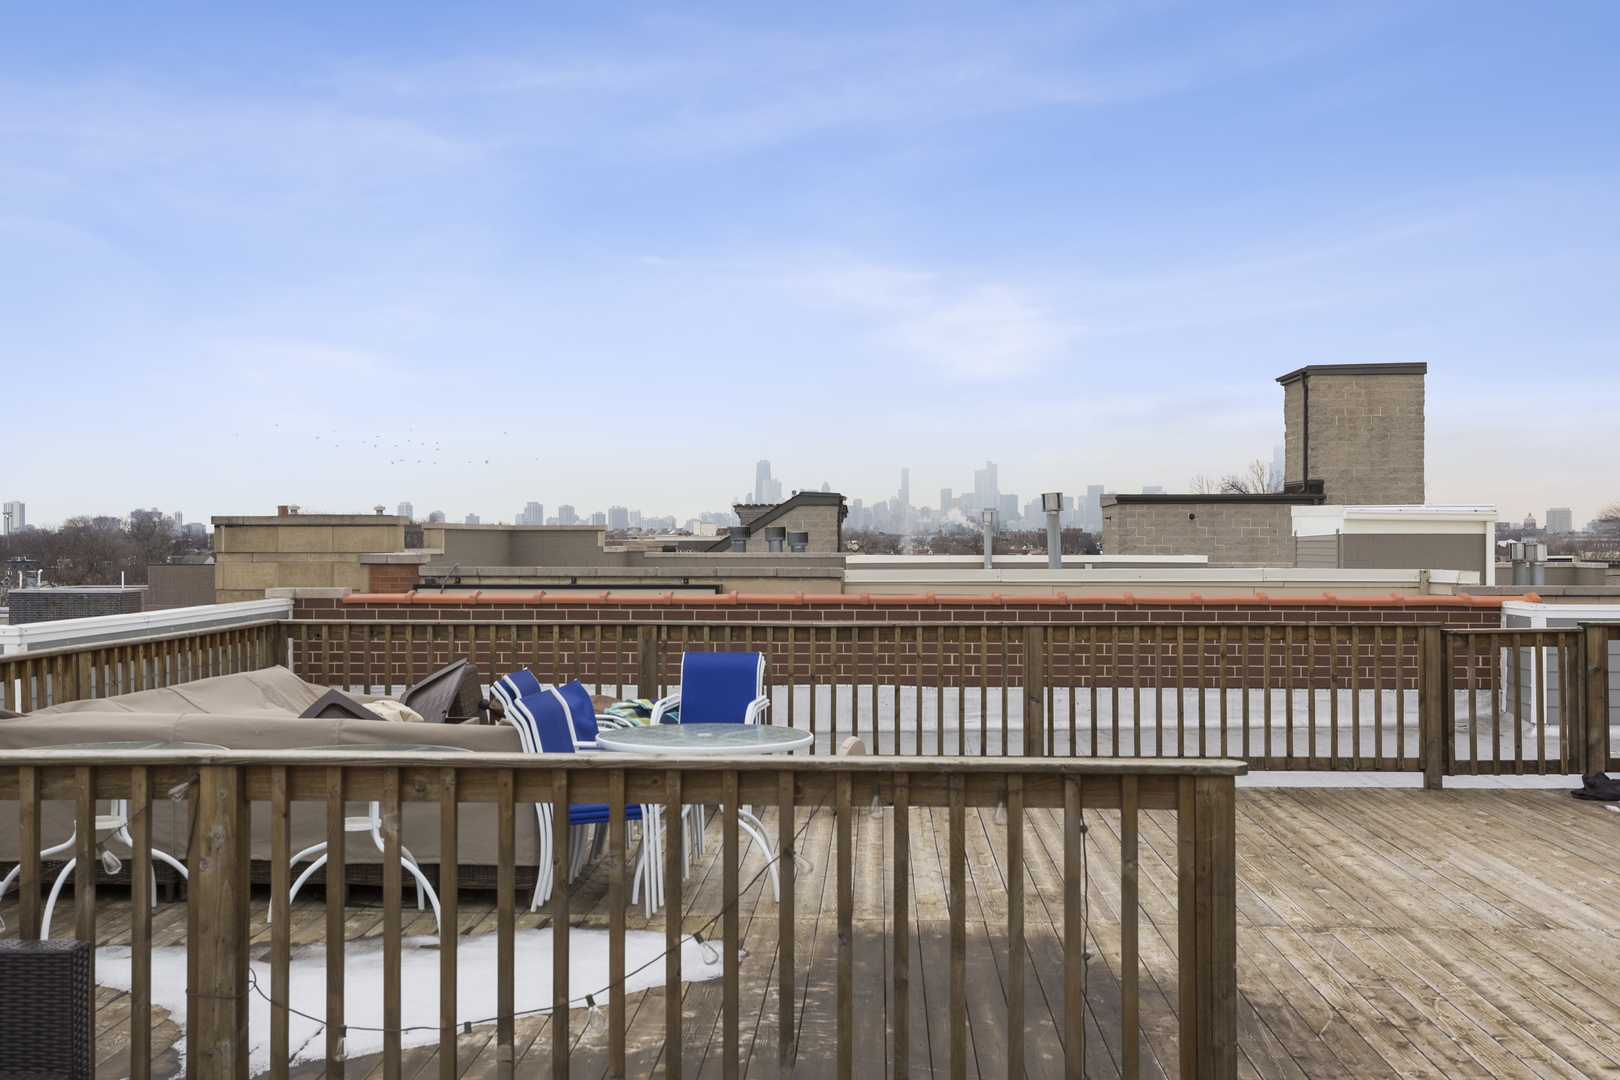 Sold: 3047 N Oakley Avenue, #404, Chicago, IL 60618 | 3 Beds / 2 Full Baths  | $519,000